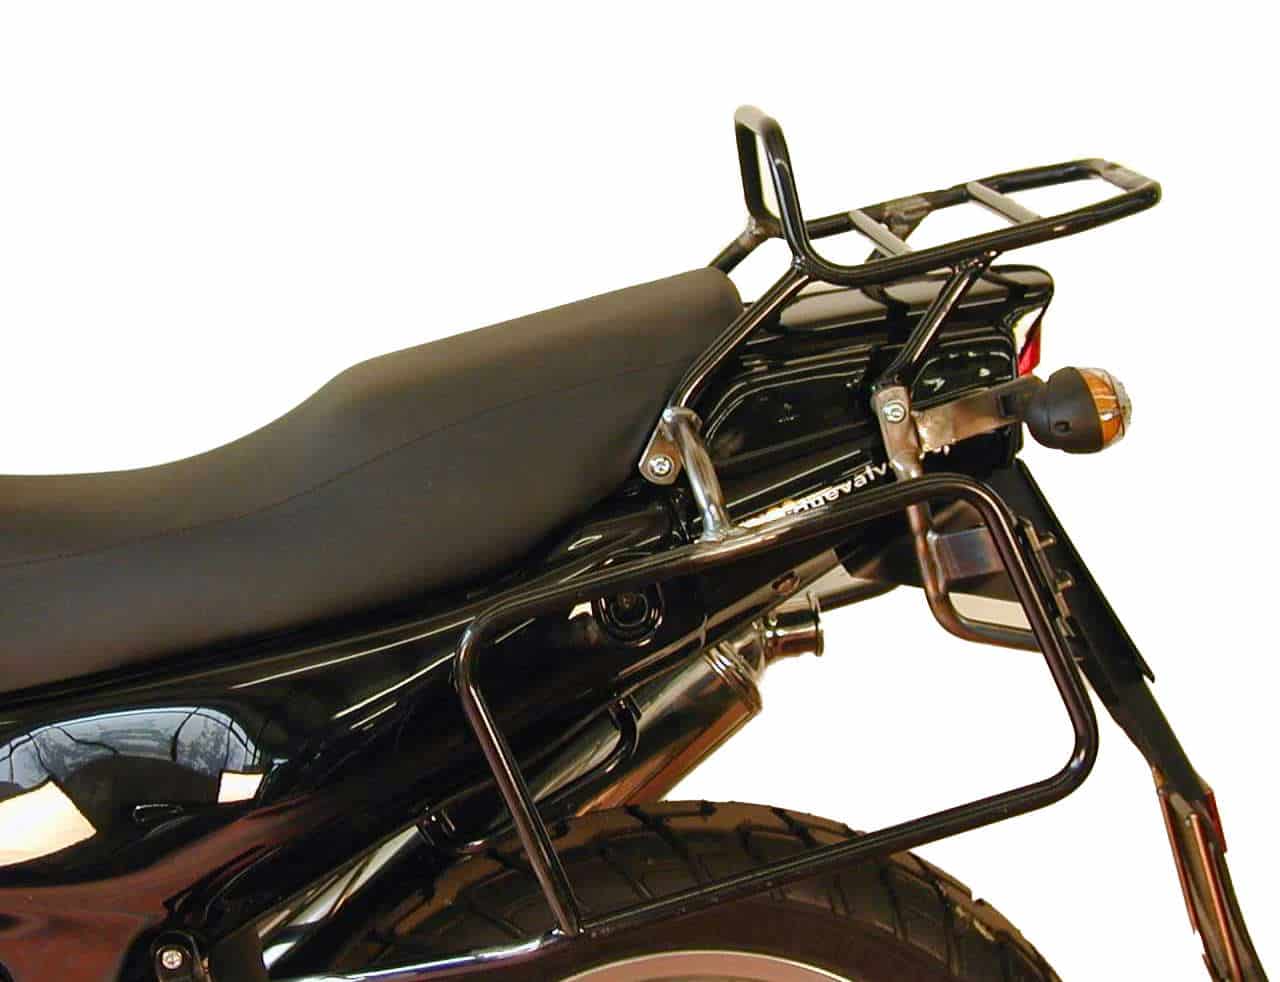 Sidecarrier permanent mounted black for Moto Guzzi Quota 1000 (1992-1998)/1100 ES (1998-2001)